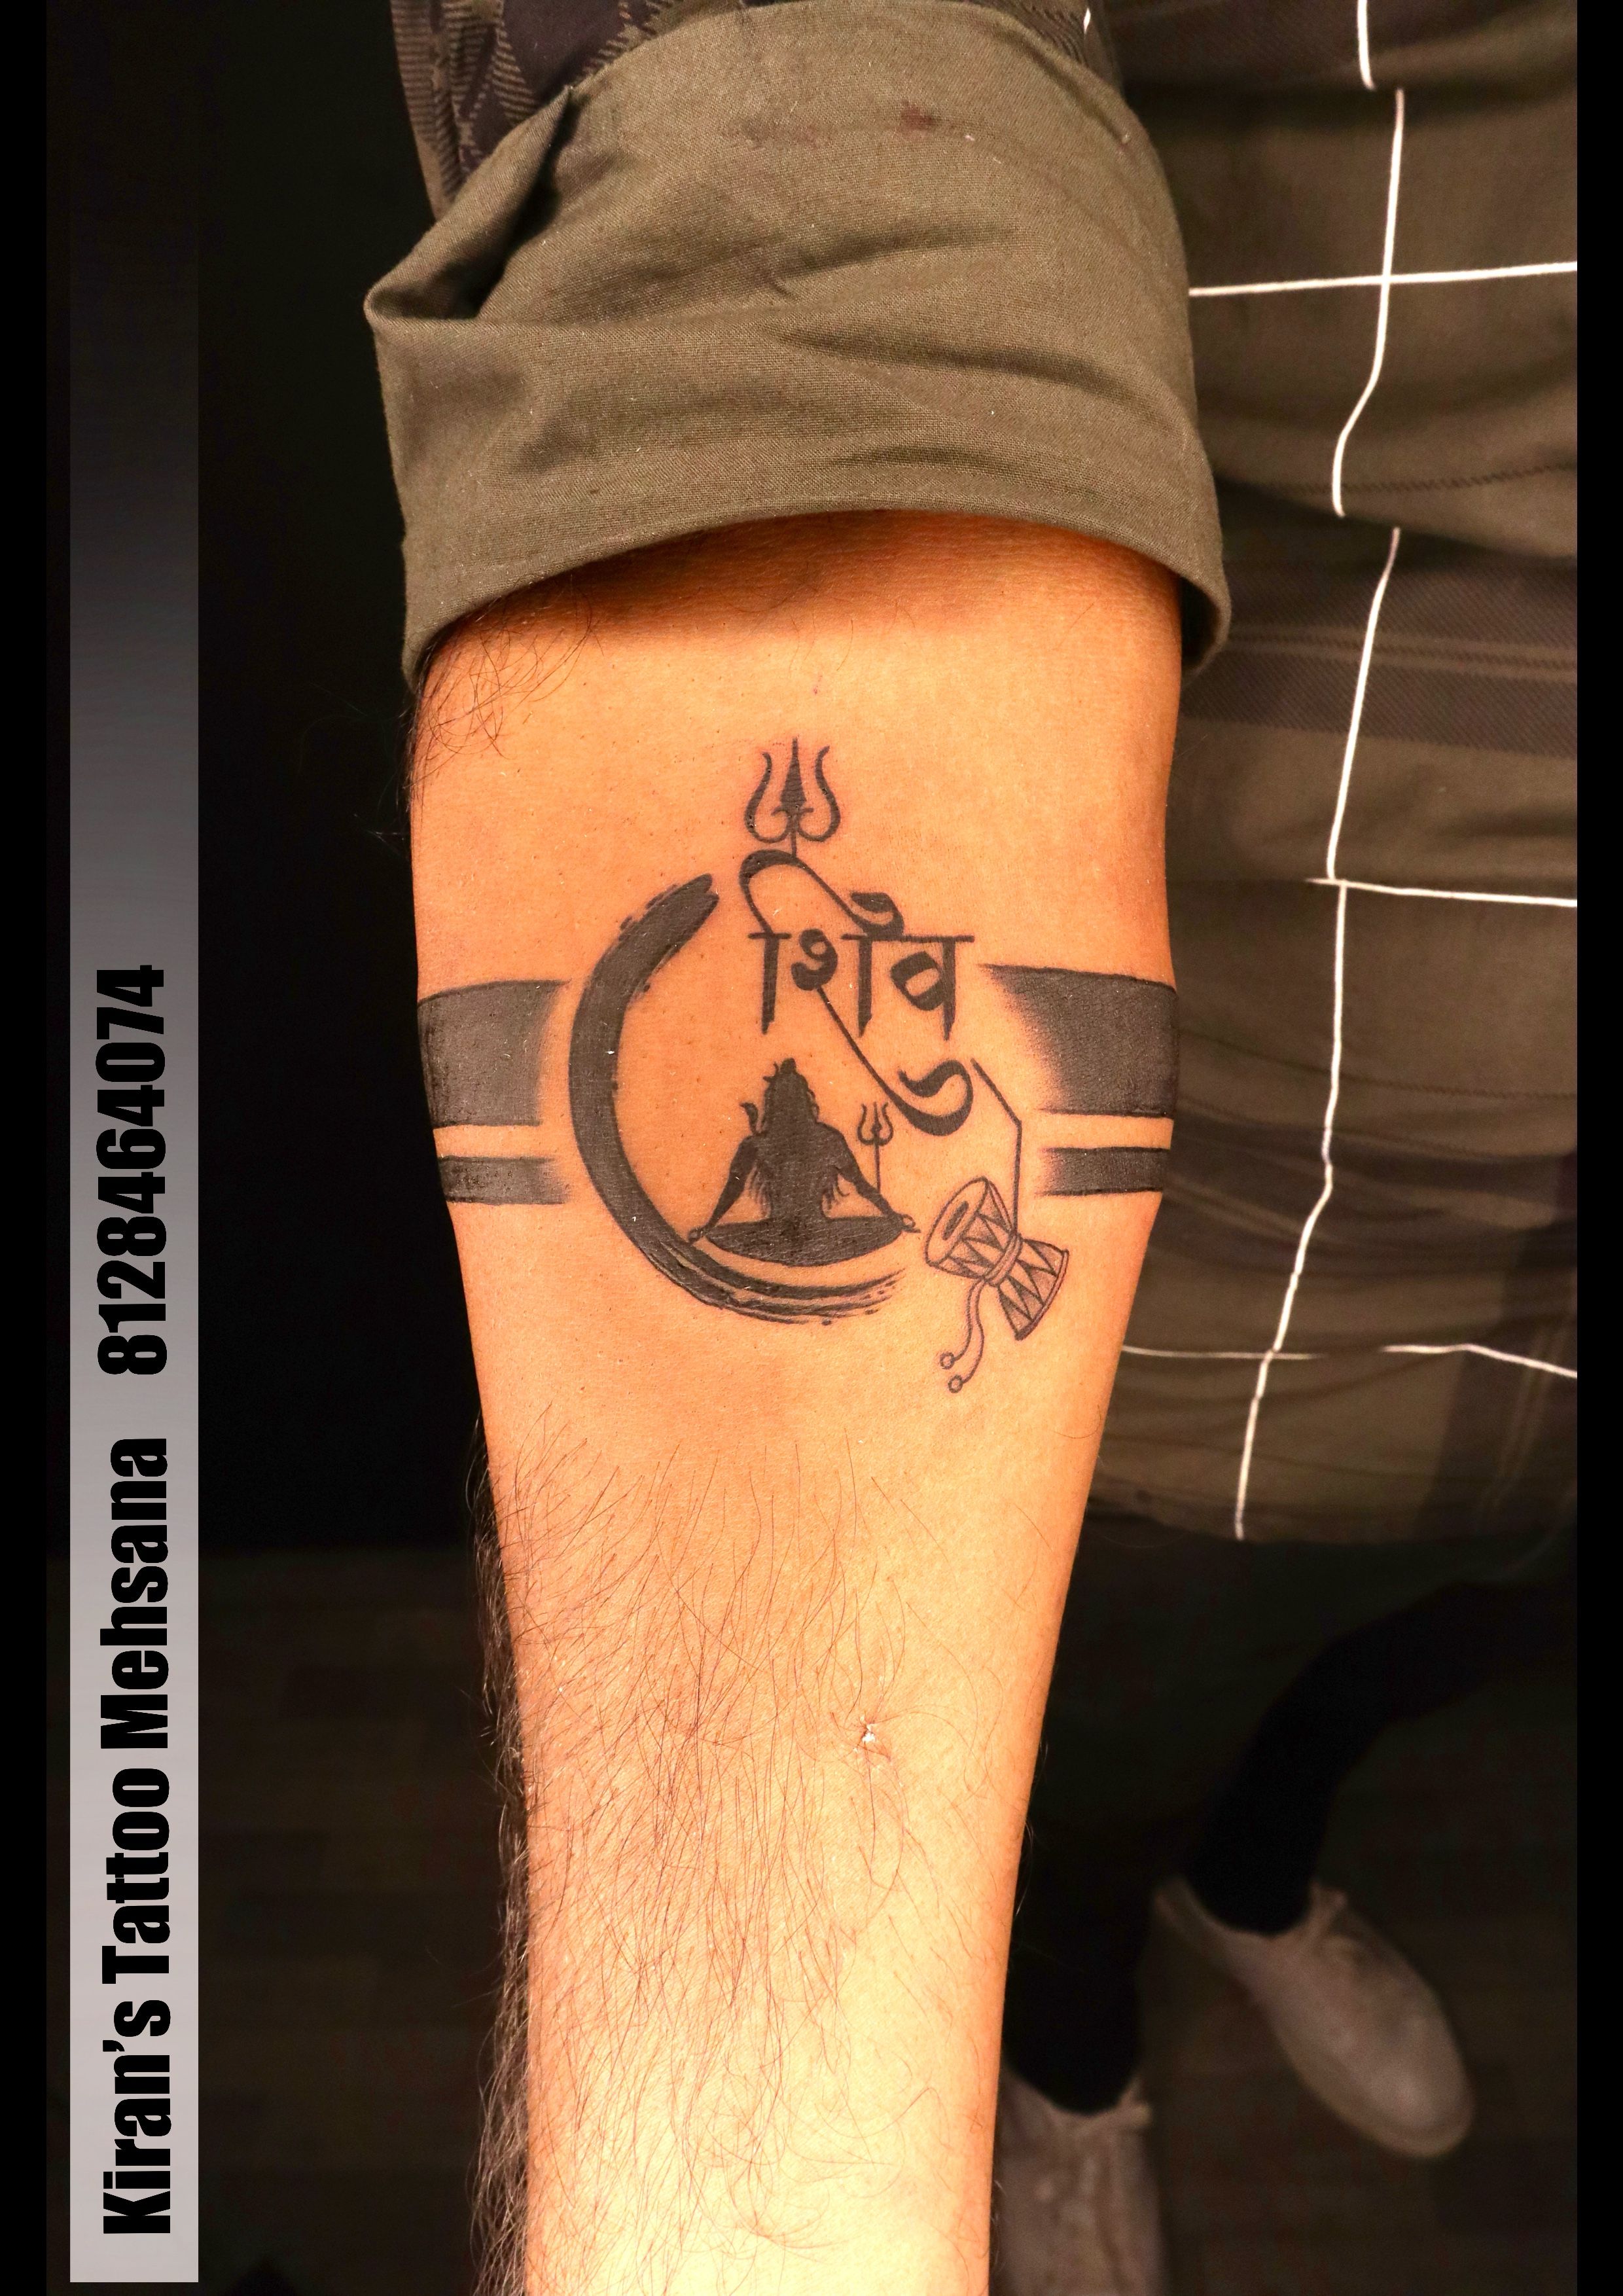 Services | EniInk Tattooz Call-7303277806 in Ghaziabad, India